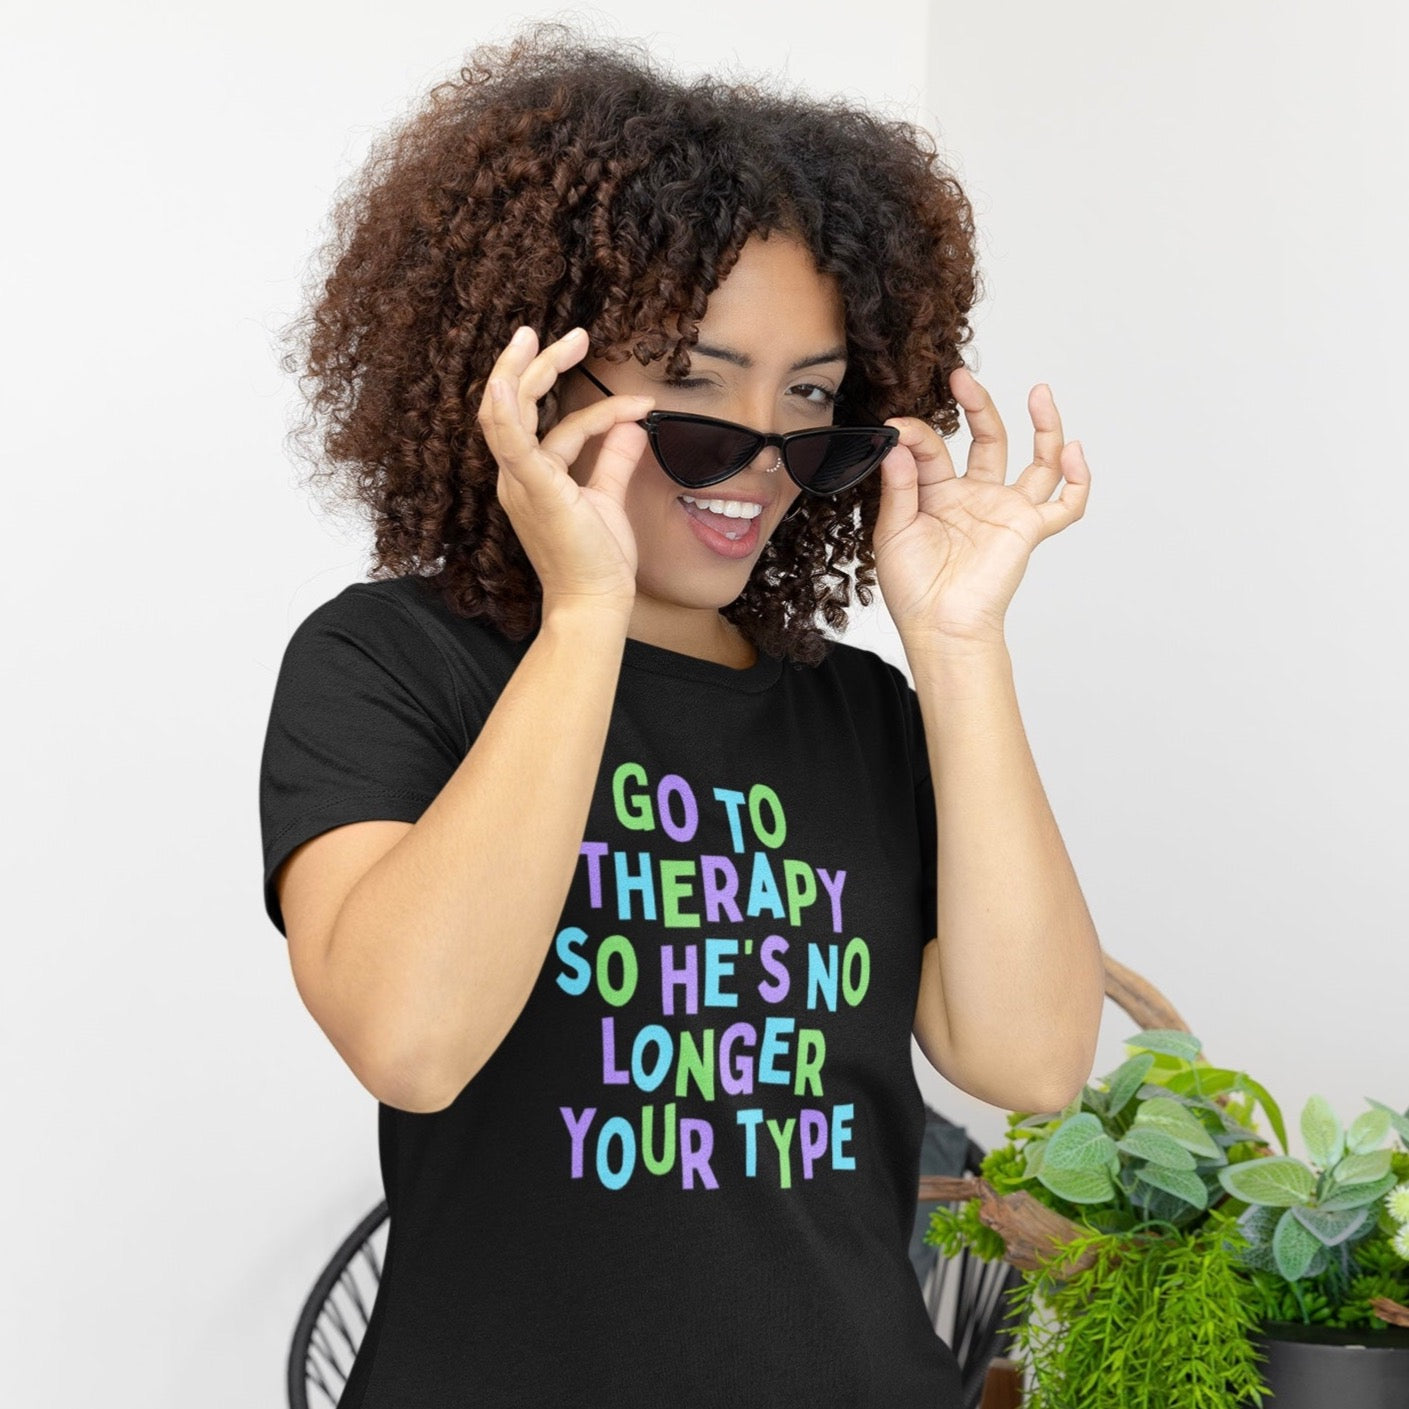 Go To Therapy So He’s No Longer Your Type Unisex Feminist t-shirt - Shop Women’s Rights T-shirts - Feminist Trash Store